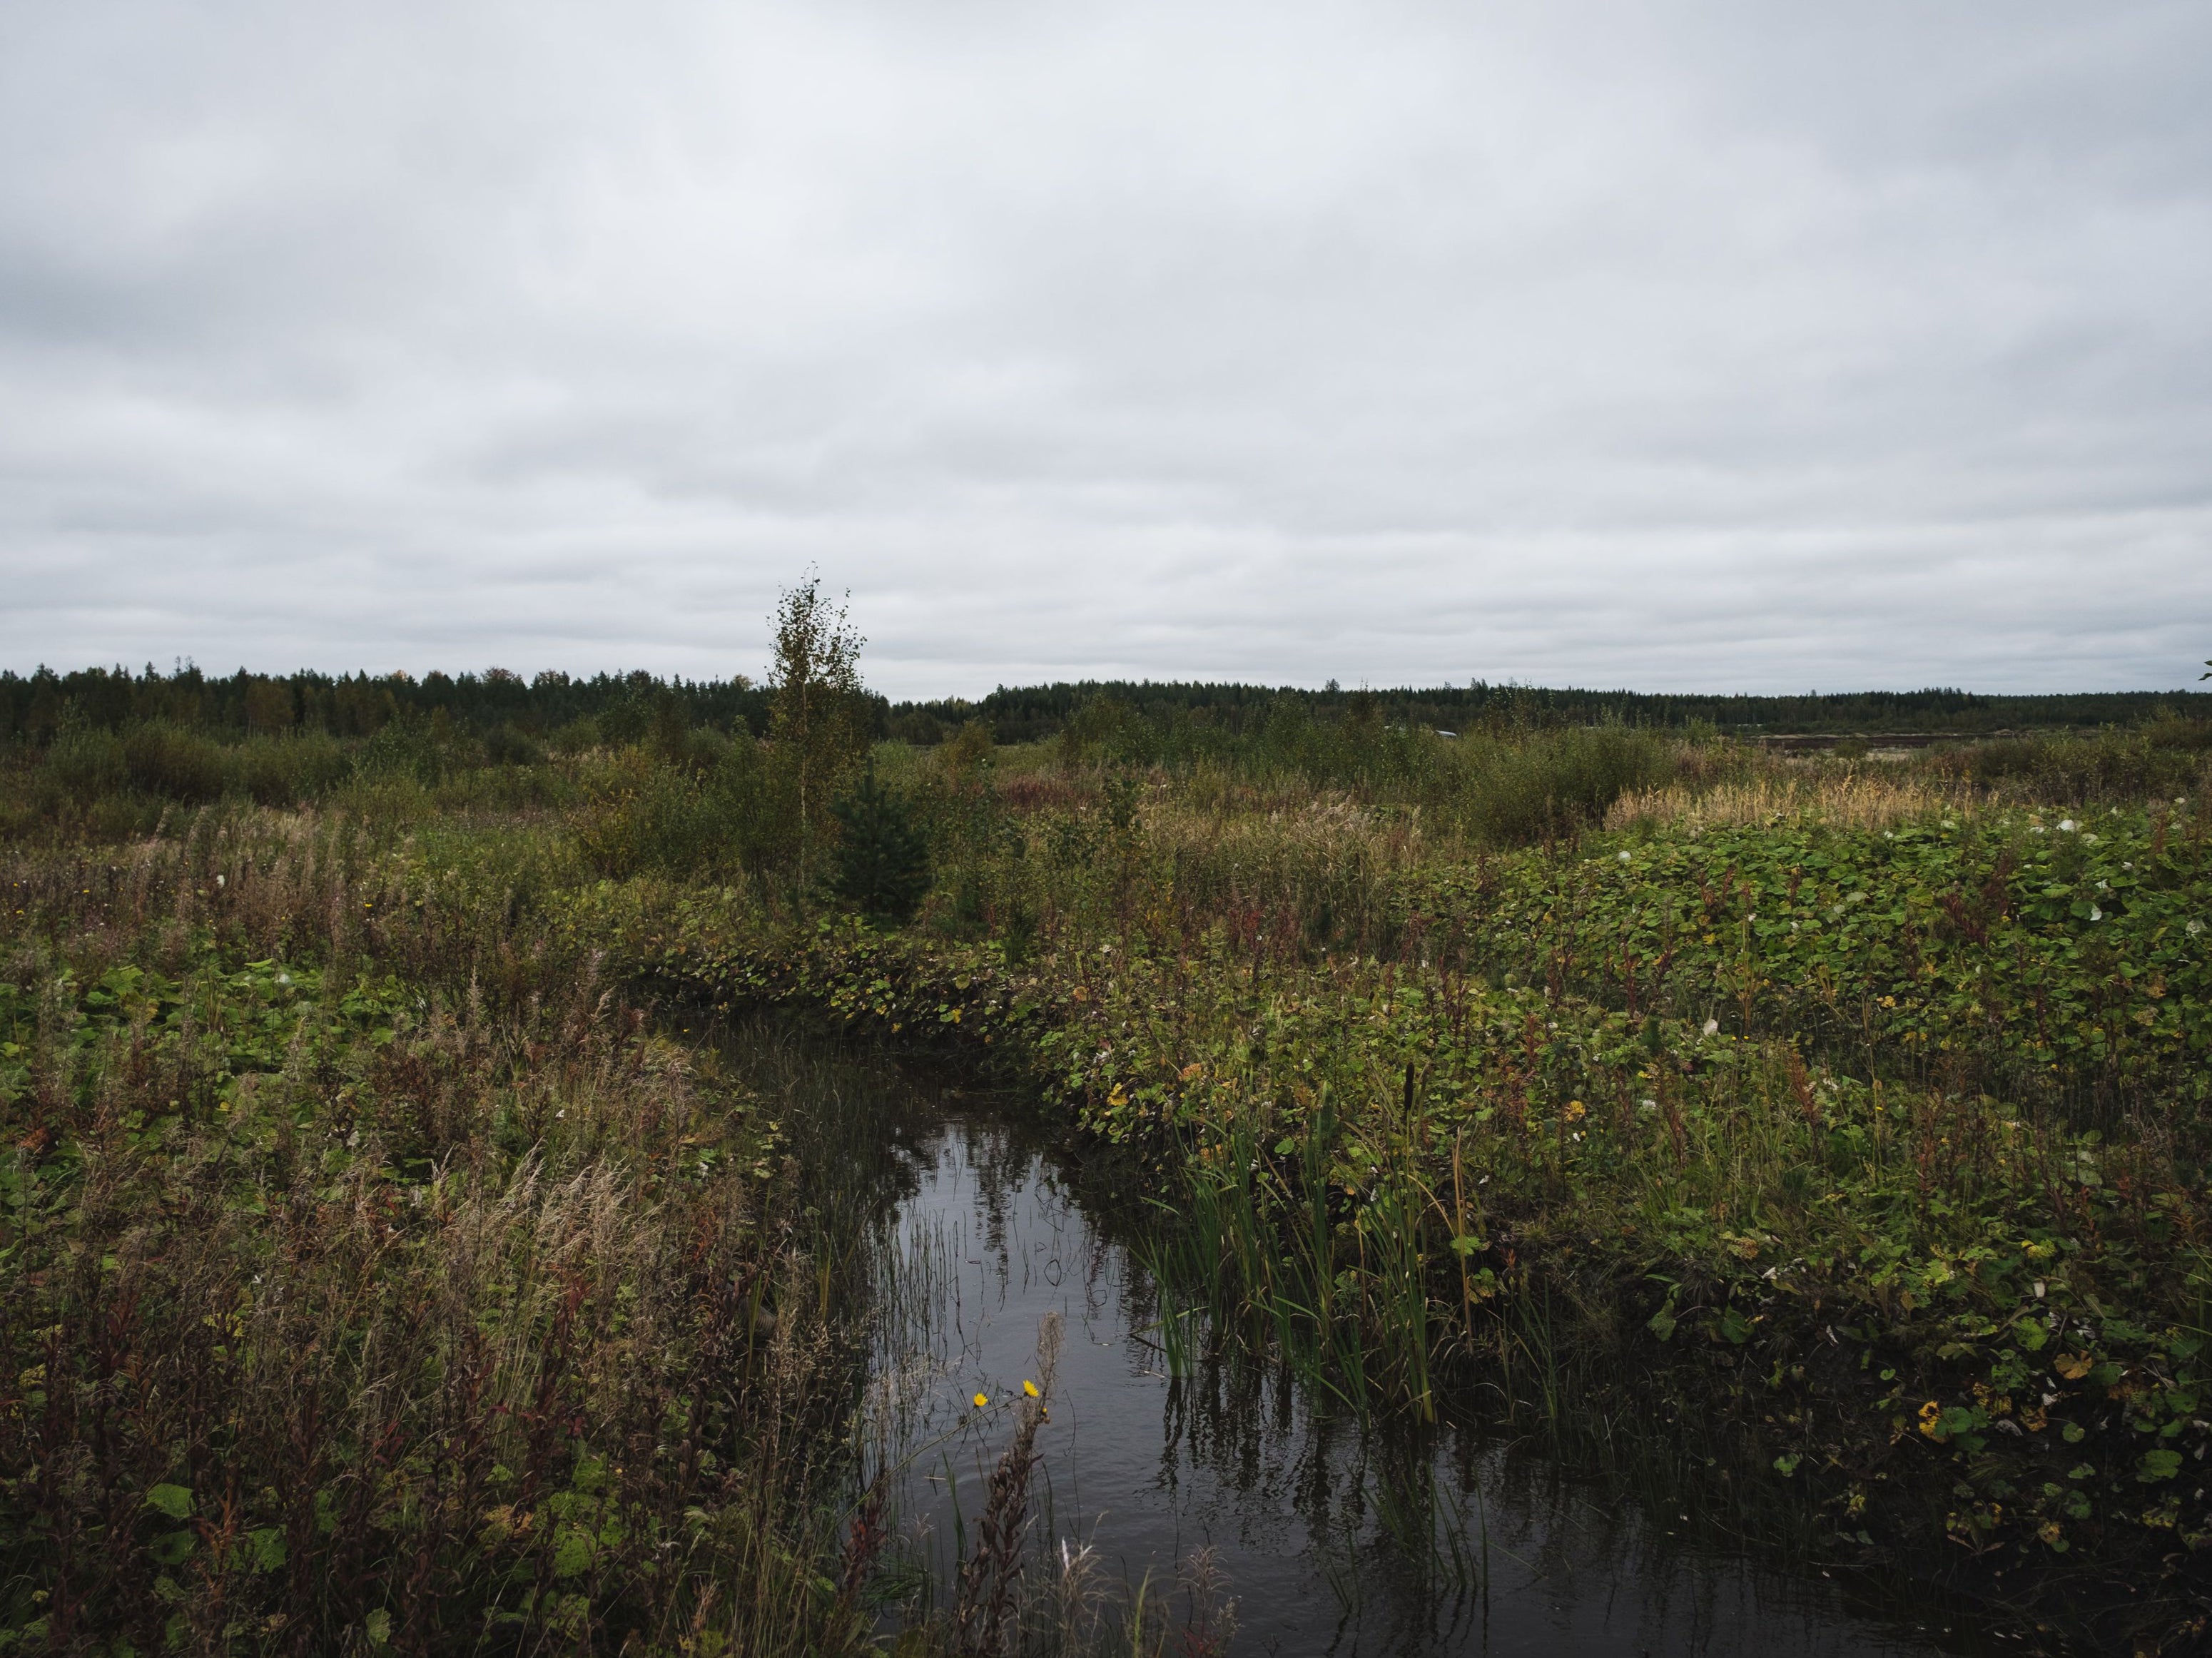 Peatlands store a third of the world's soil carbon